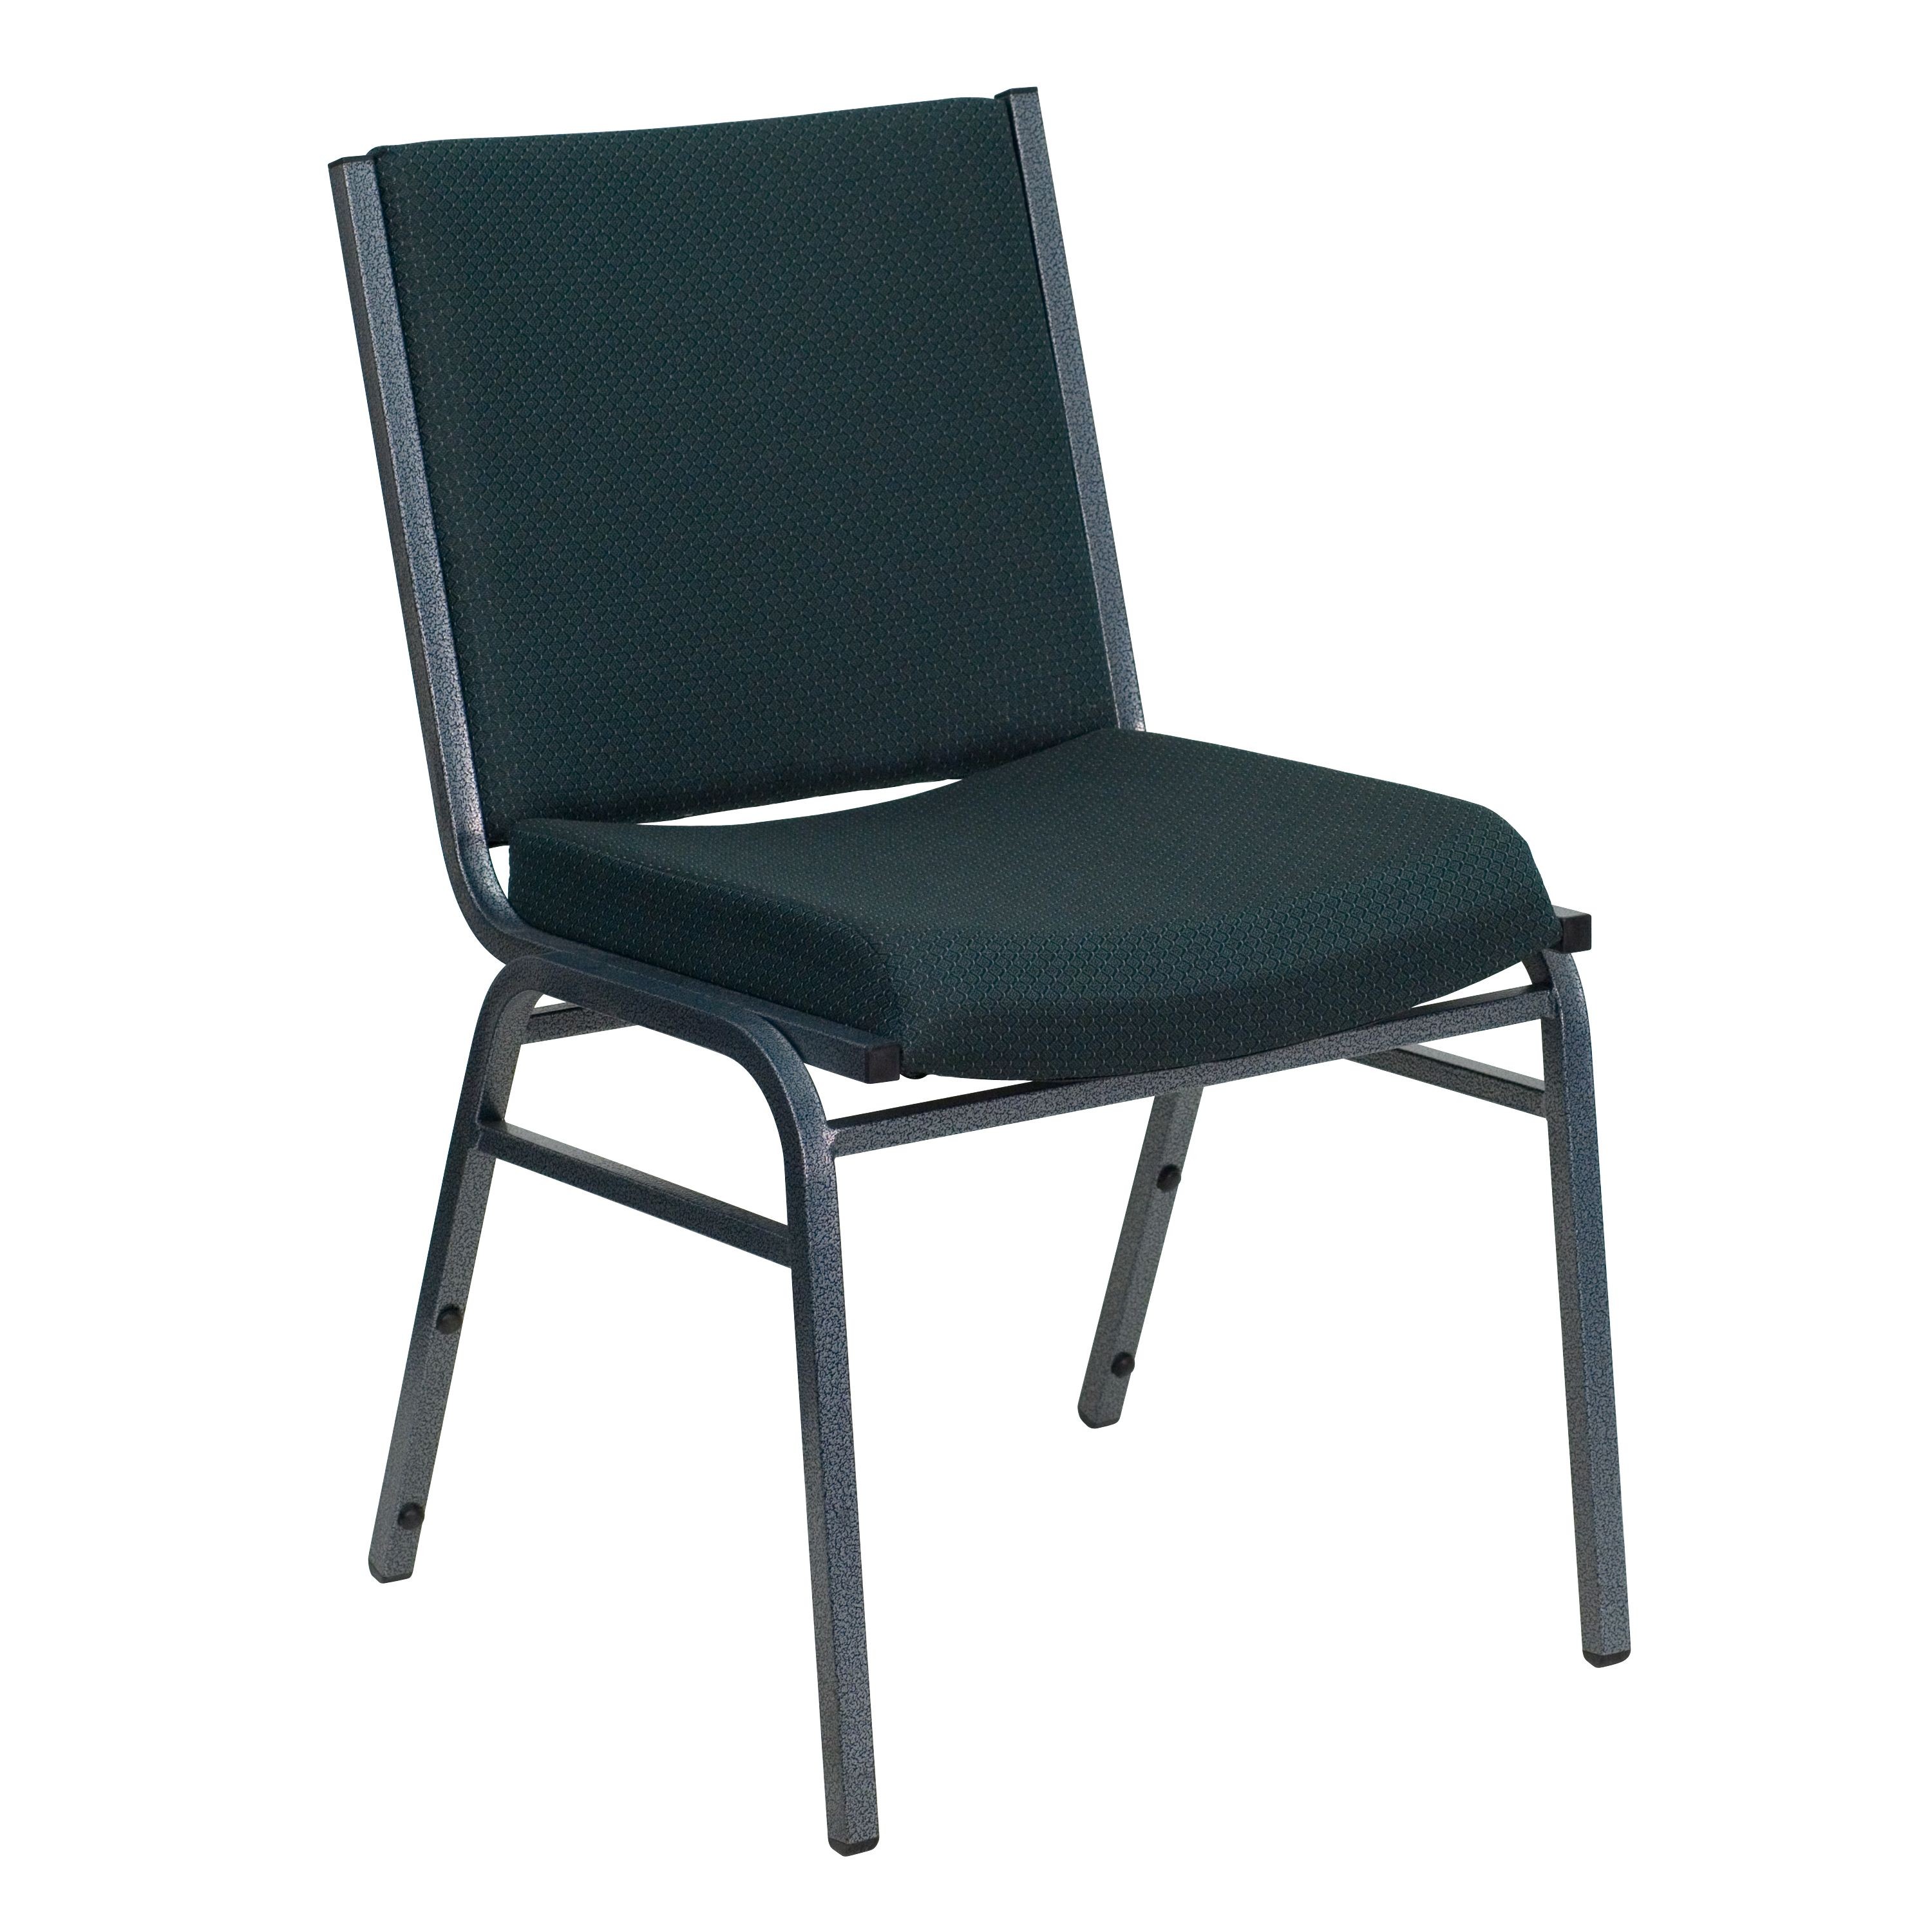 Flash Furniture XU-60153-GN-GG Heavy Duty, 3" Thickly Padded, Green Patterned Upholstered Stack Chair